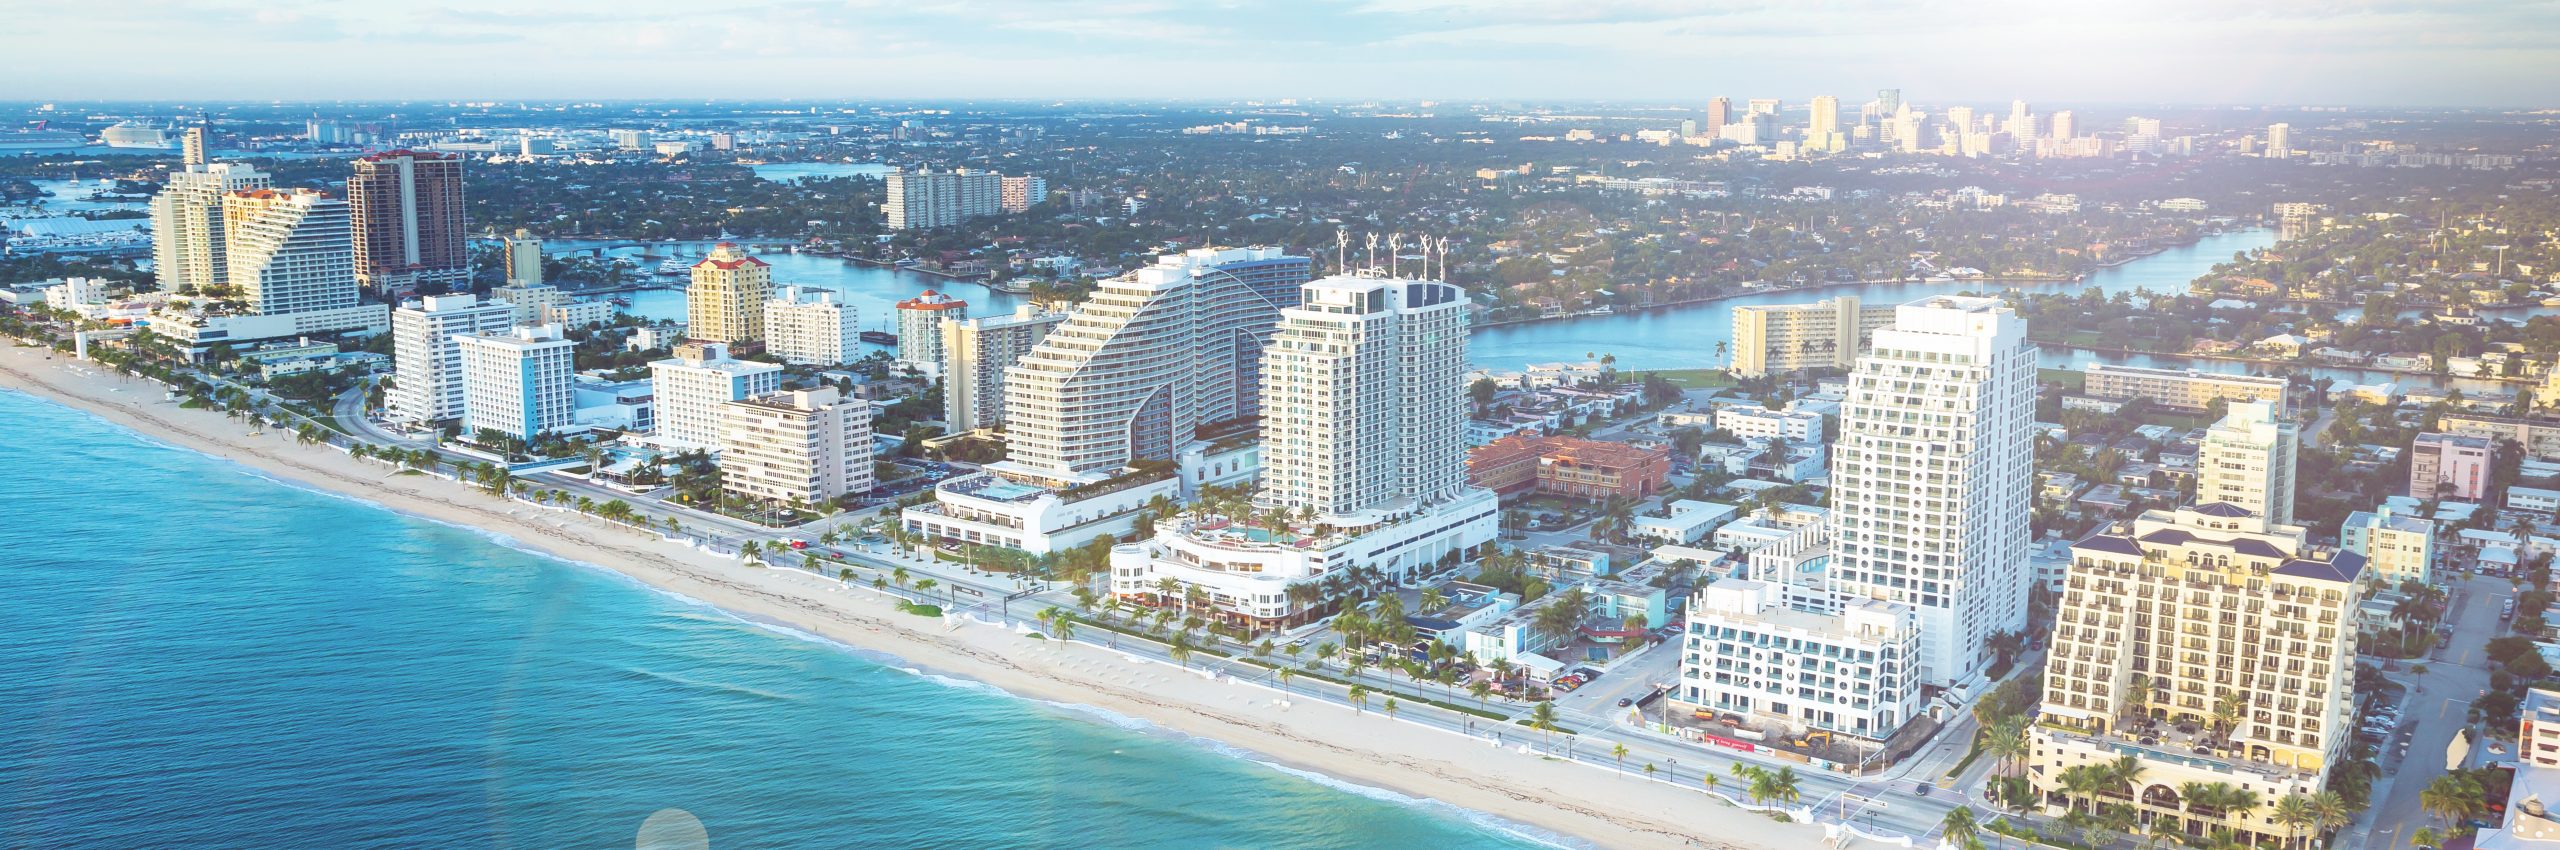 New Fort Lauderdale Pre Construction Condos: Selene, 160 Marina Bay, Four Seasons Fort Lauderdale and One24 Residences